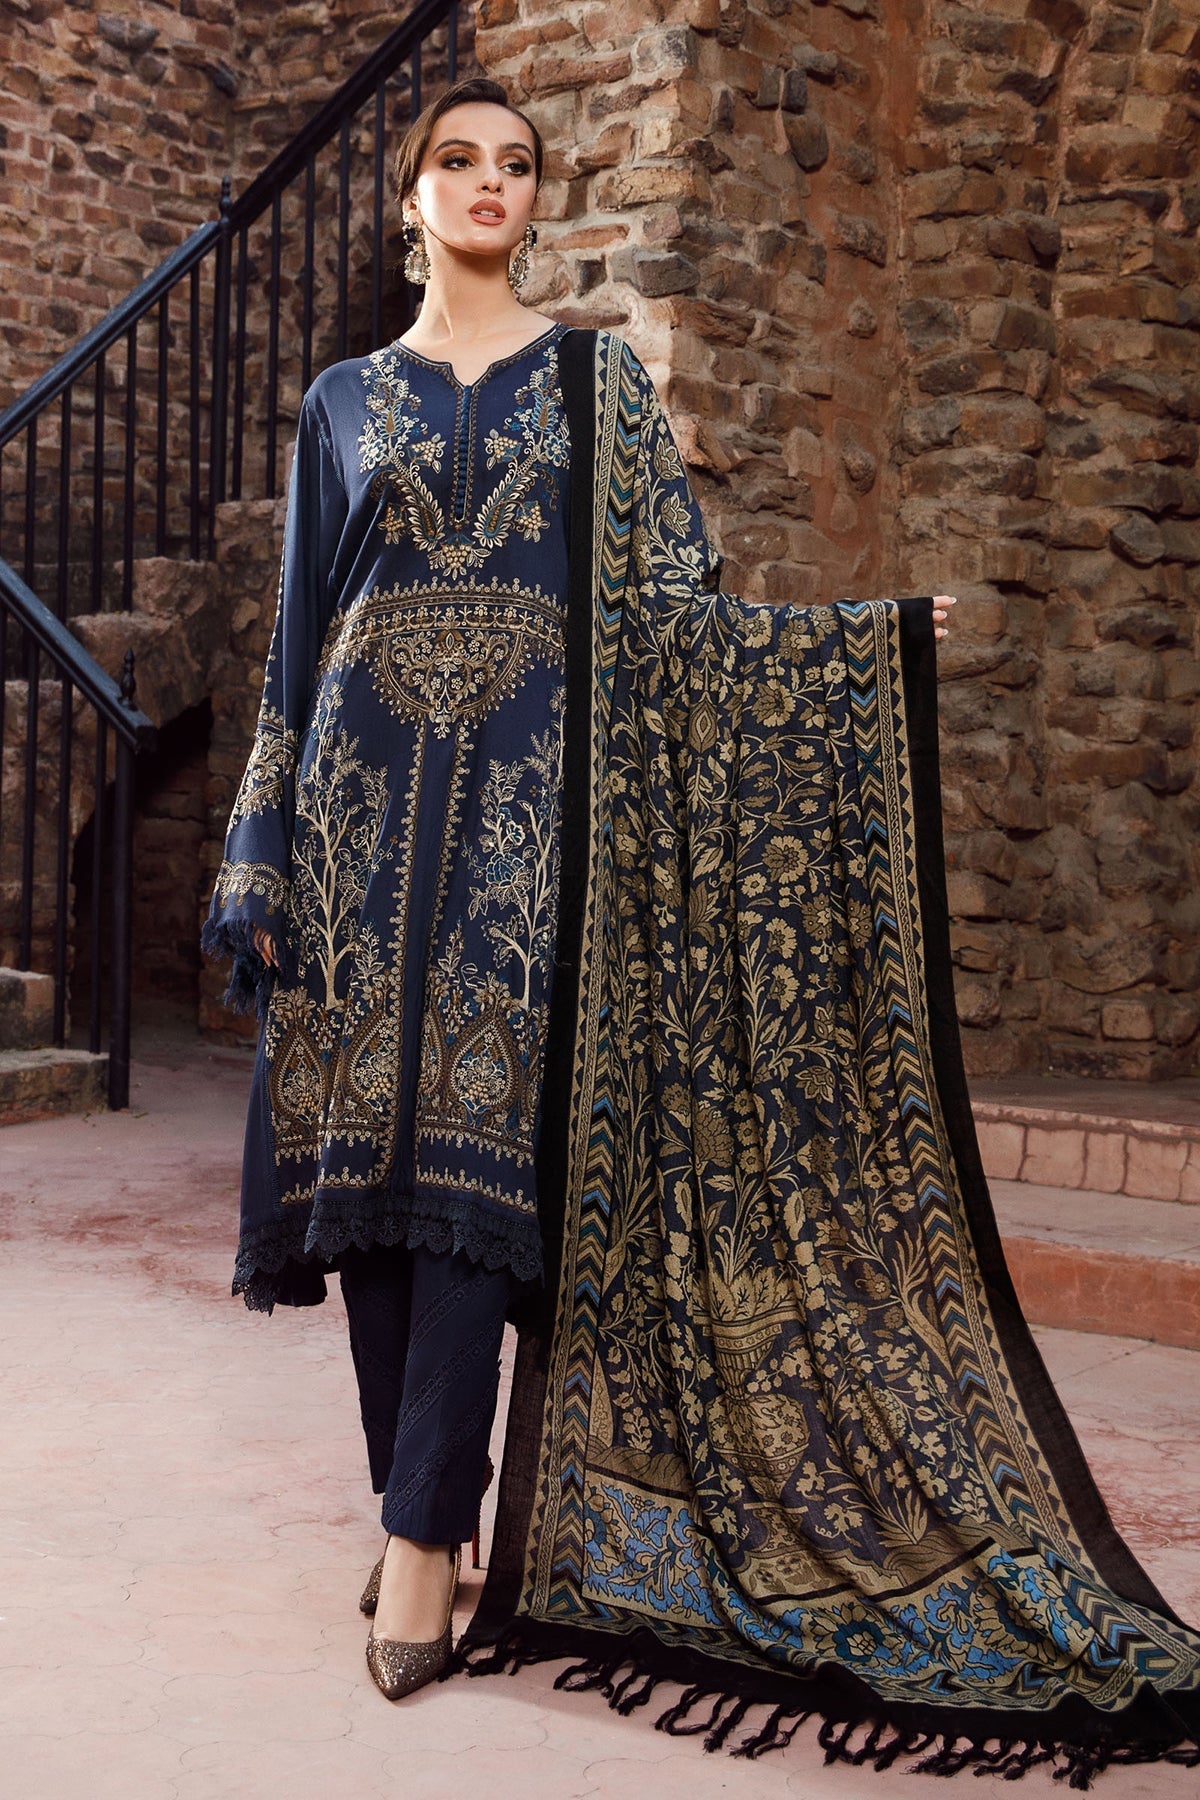 Maria B 3PC Fully Embroidered Dhanak Suit - GA1619